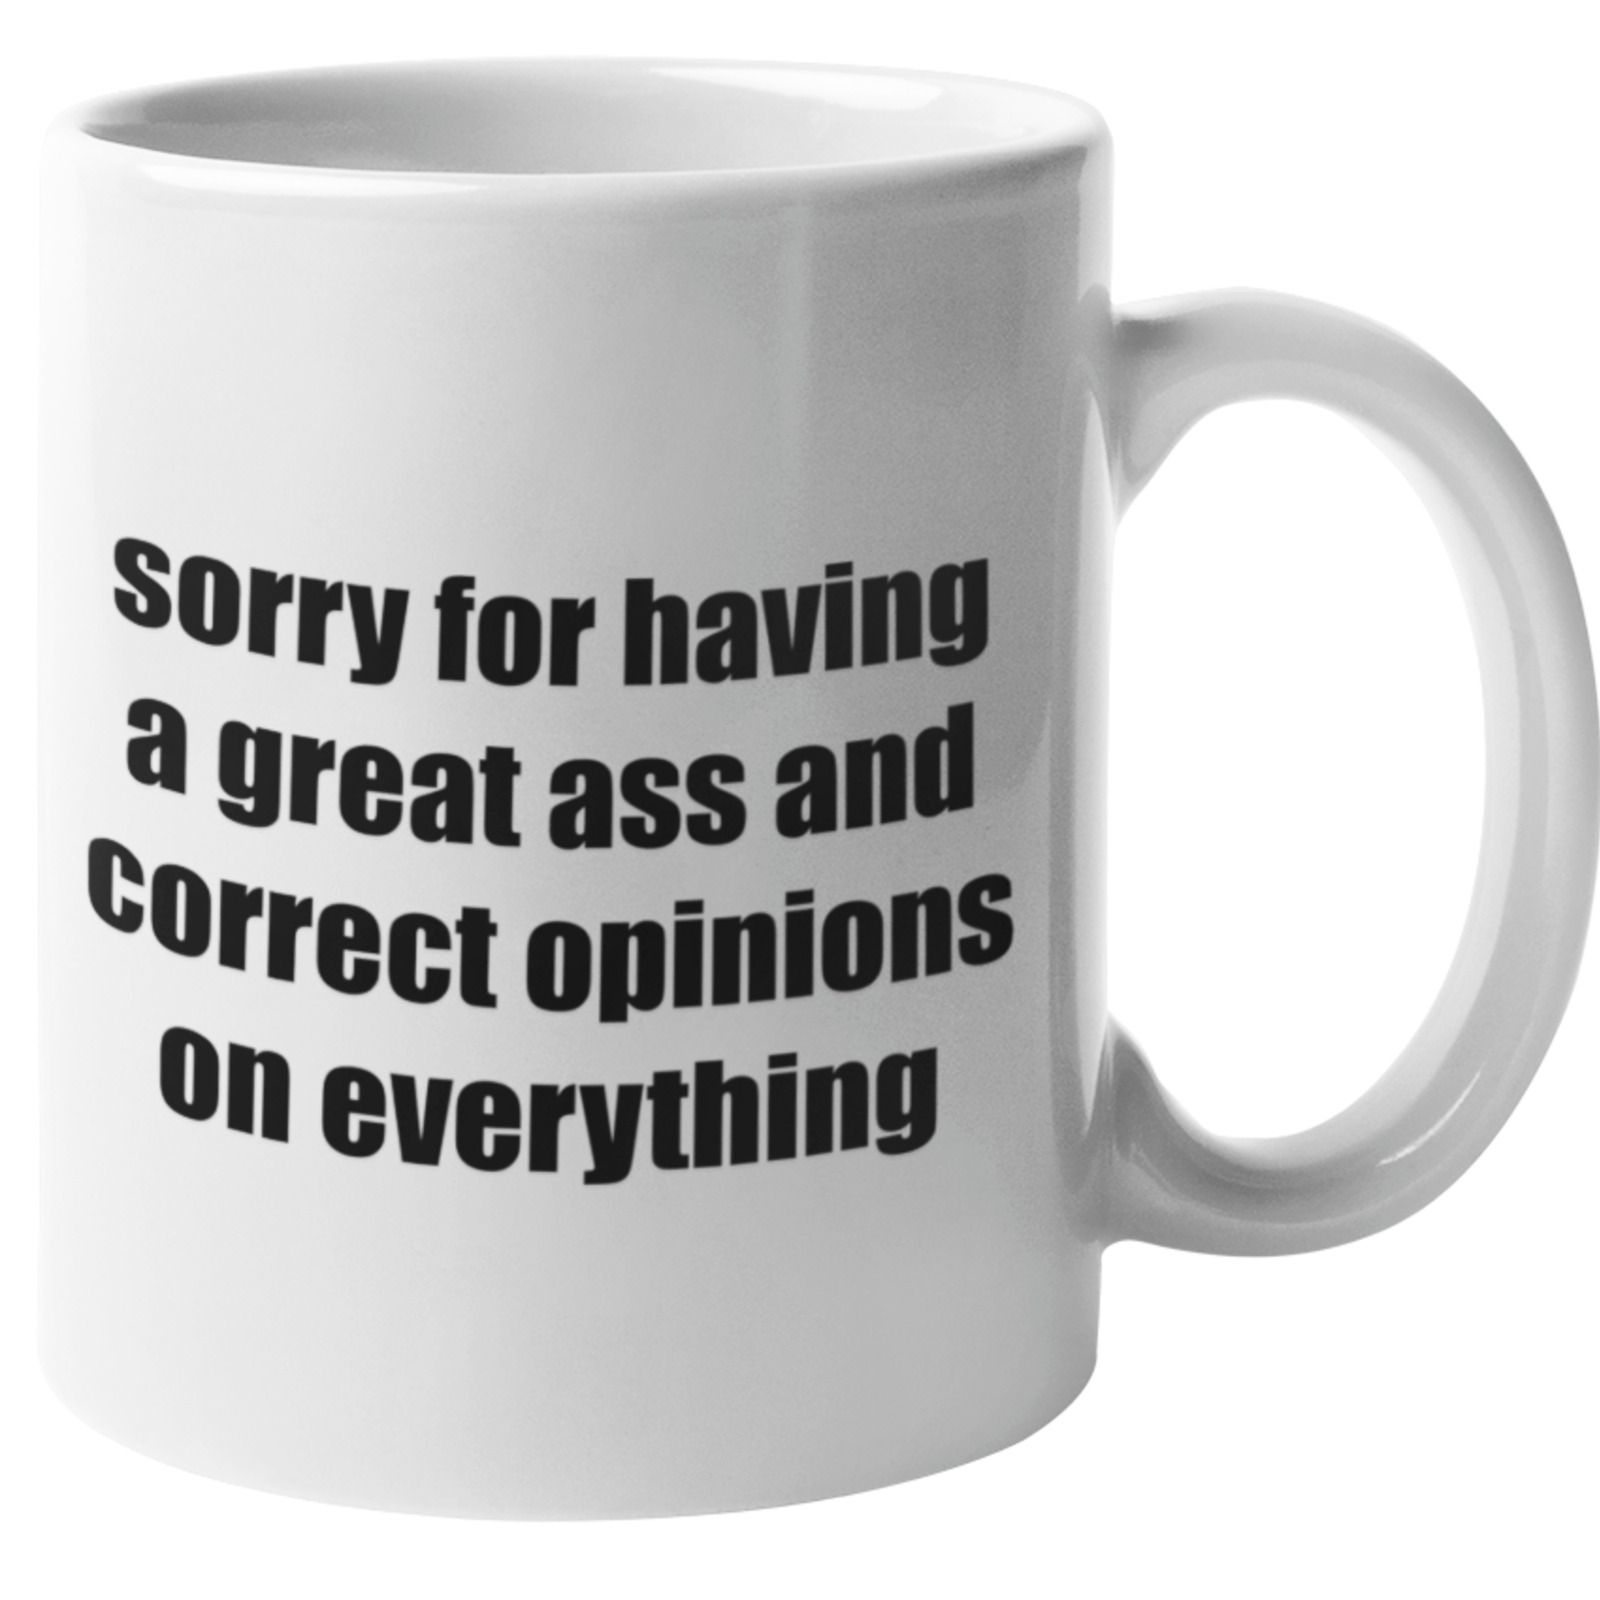 SORRY FOR HAVING A GREAT ASS AND CORRECT OPINIONS ON EVERYTHING COFFEE MUG.